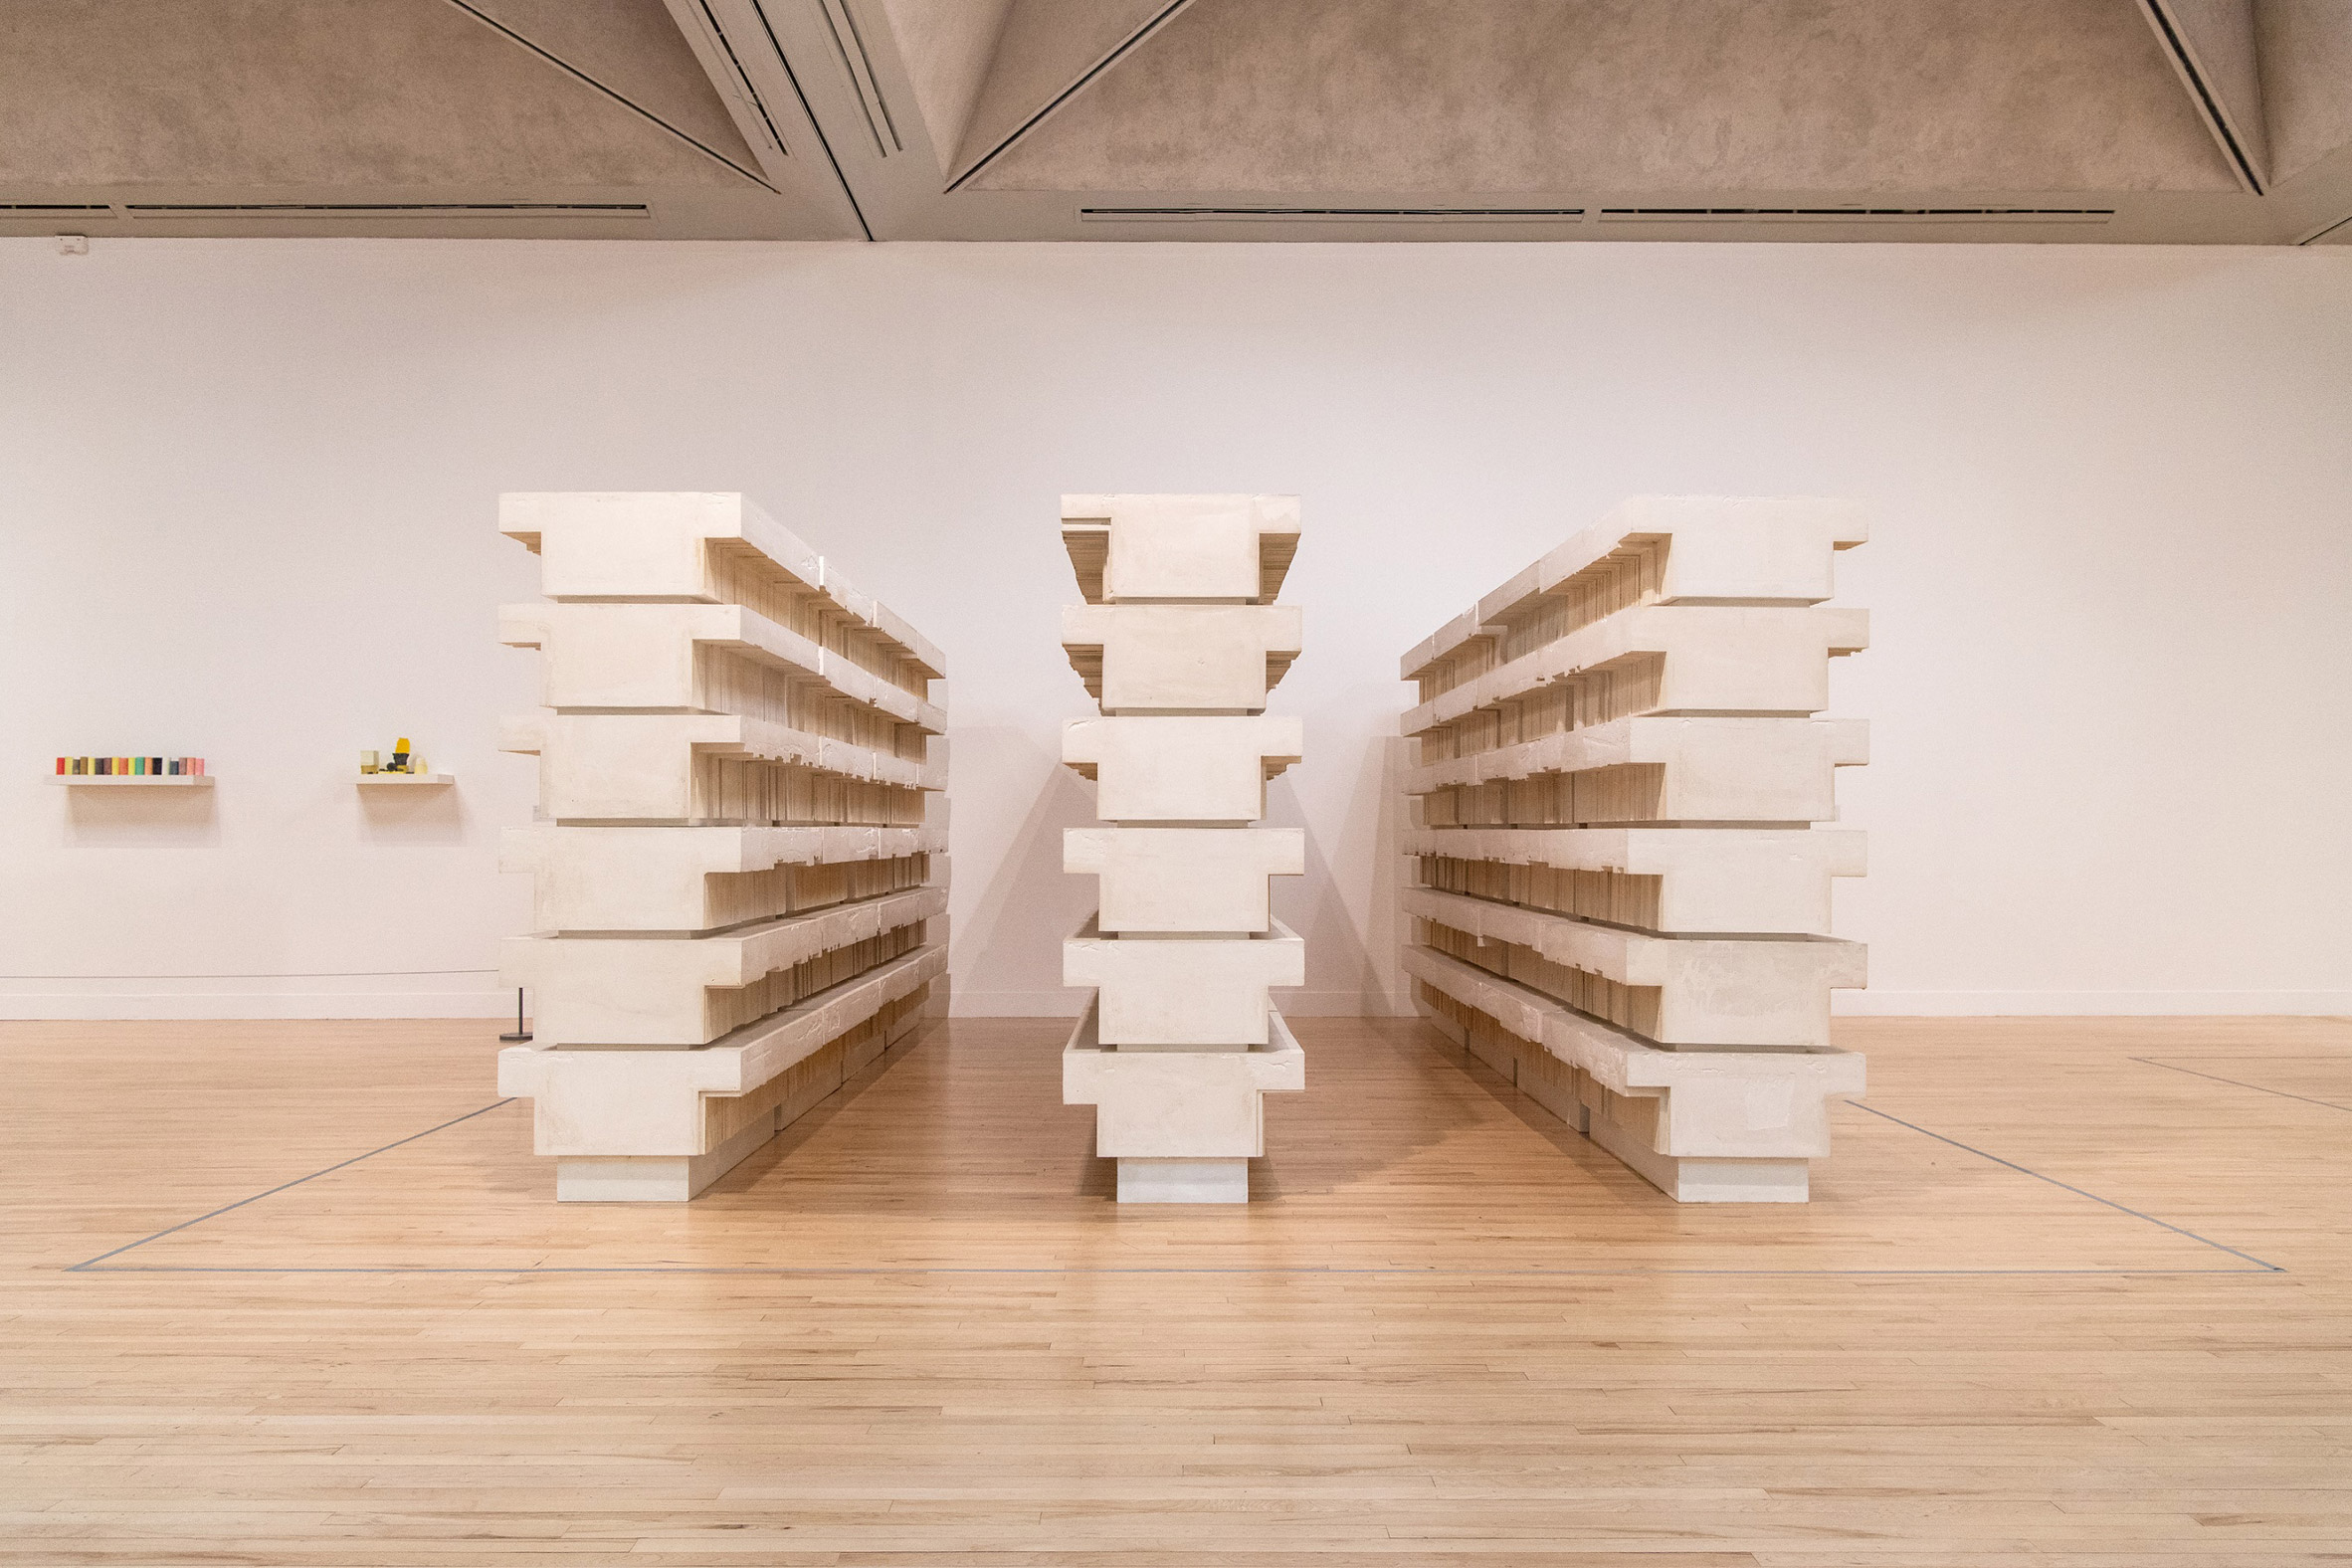 Tate Britain commemorates over three decades-worth of work by contemporary artist Rachel Whiteread